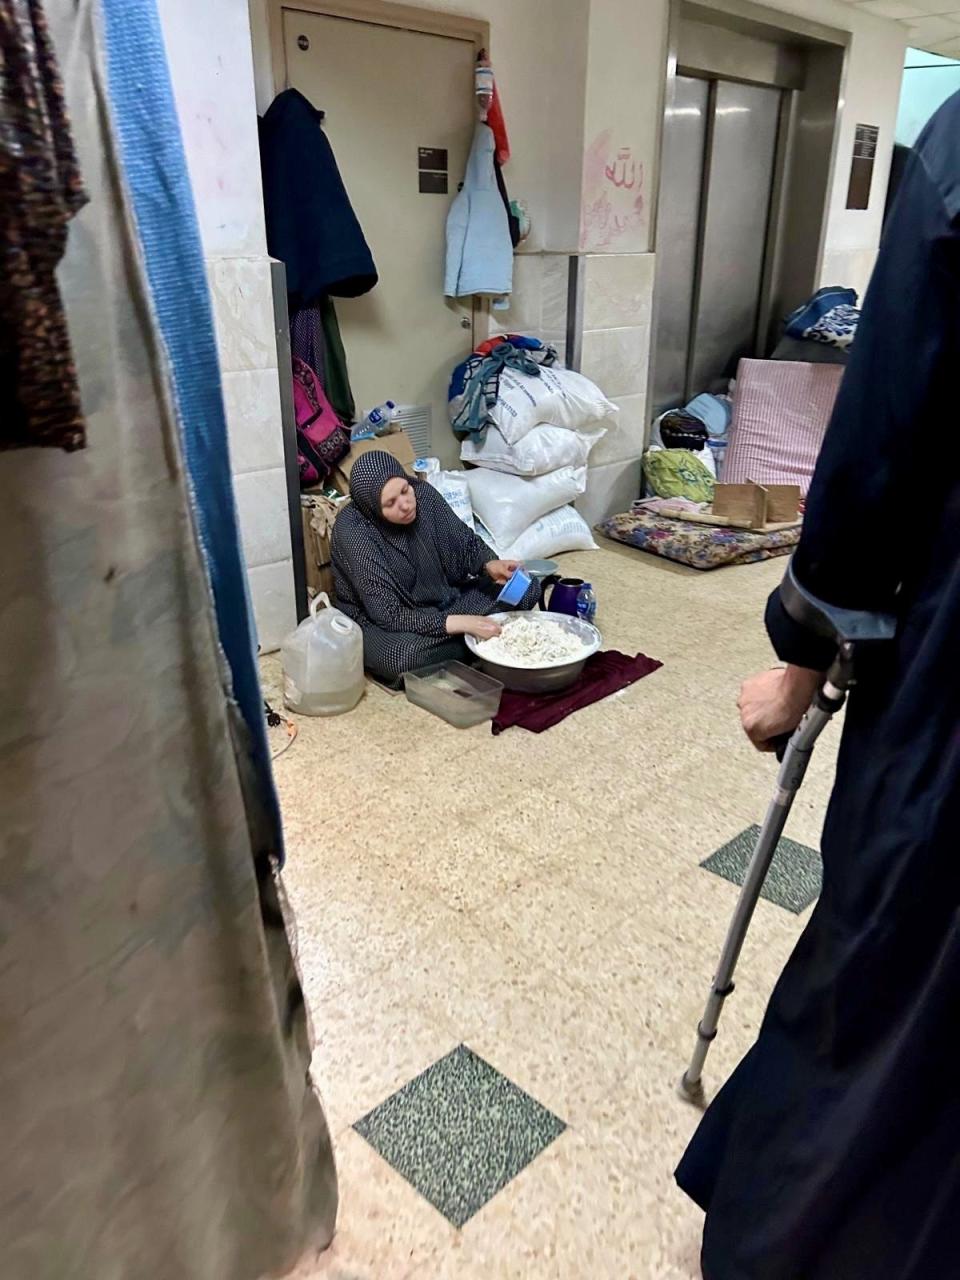 In Gaza, where only one-quarter of hospitals remain operational amid ongoing fighting, the European Hospital has become a shelter for families who have nowhere else to go, said Dr. Ammar Ghanem, 54, of West Bloomfield, who traveled to the region May 1 to provide medical relief. By some estimates as many as 30,000 people are living in and around the hospital.